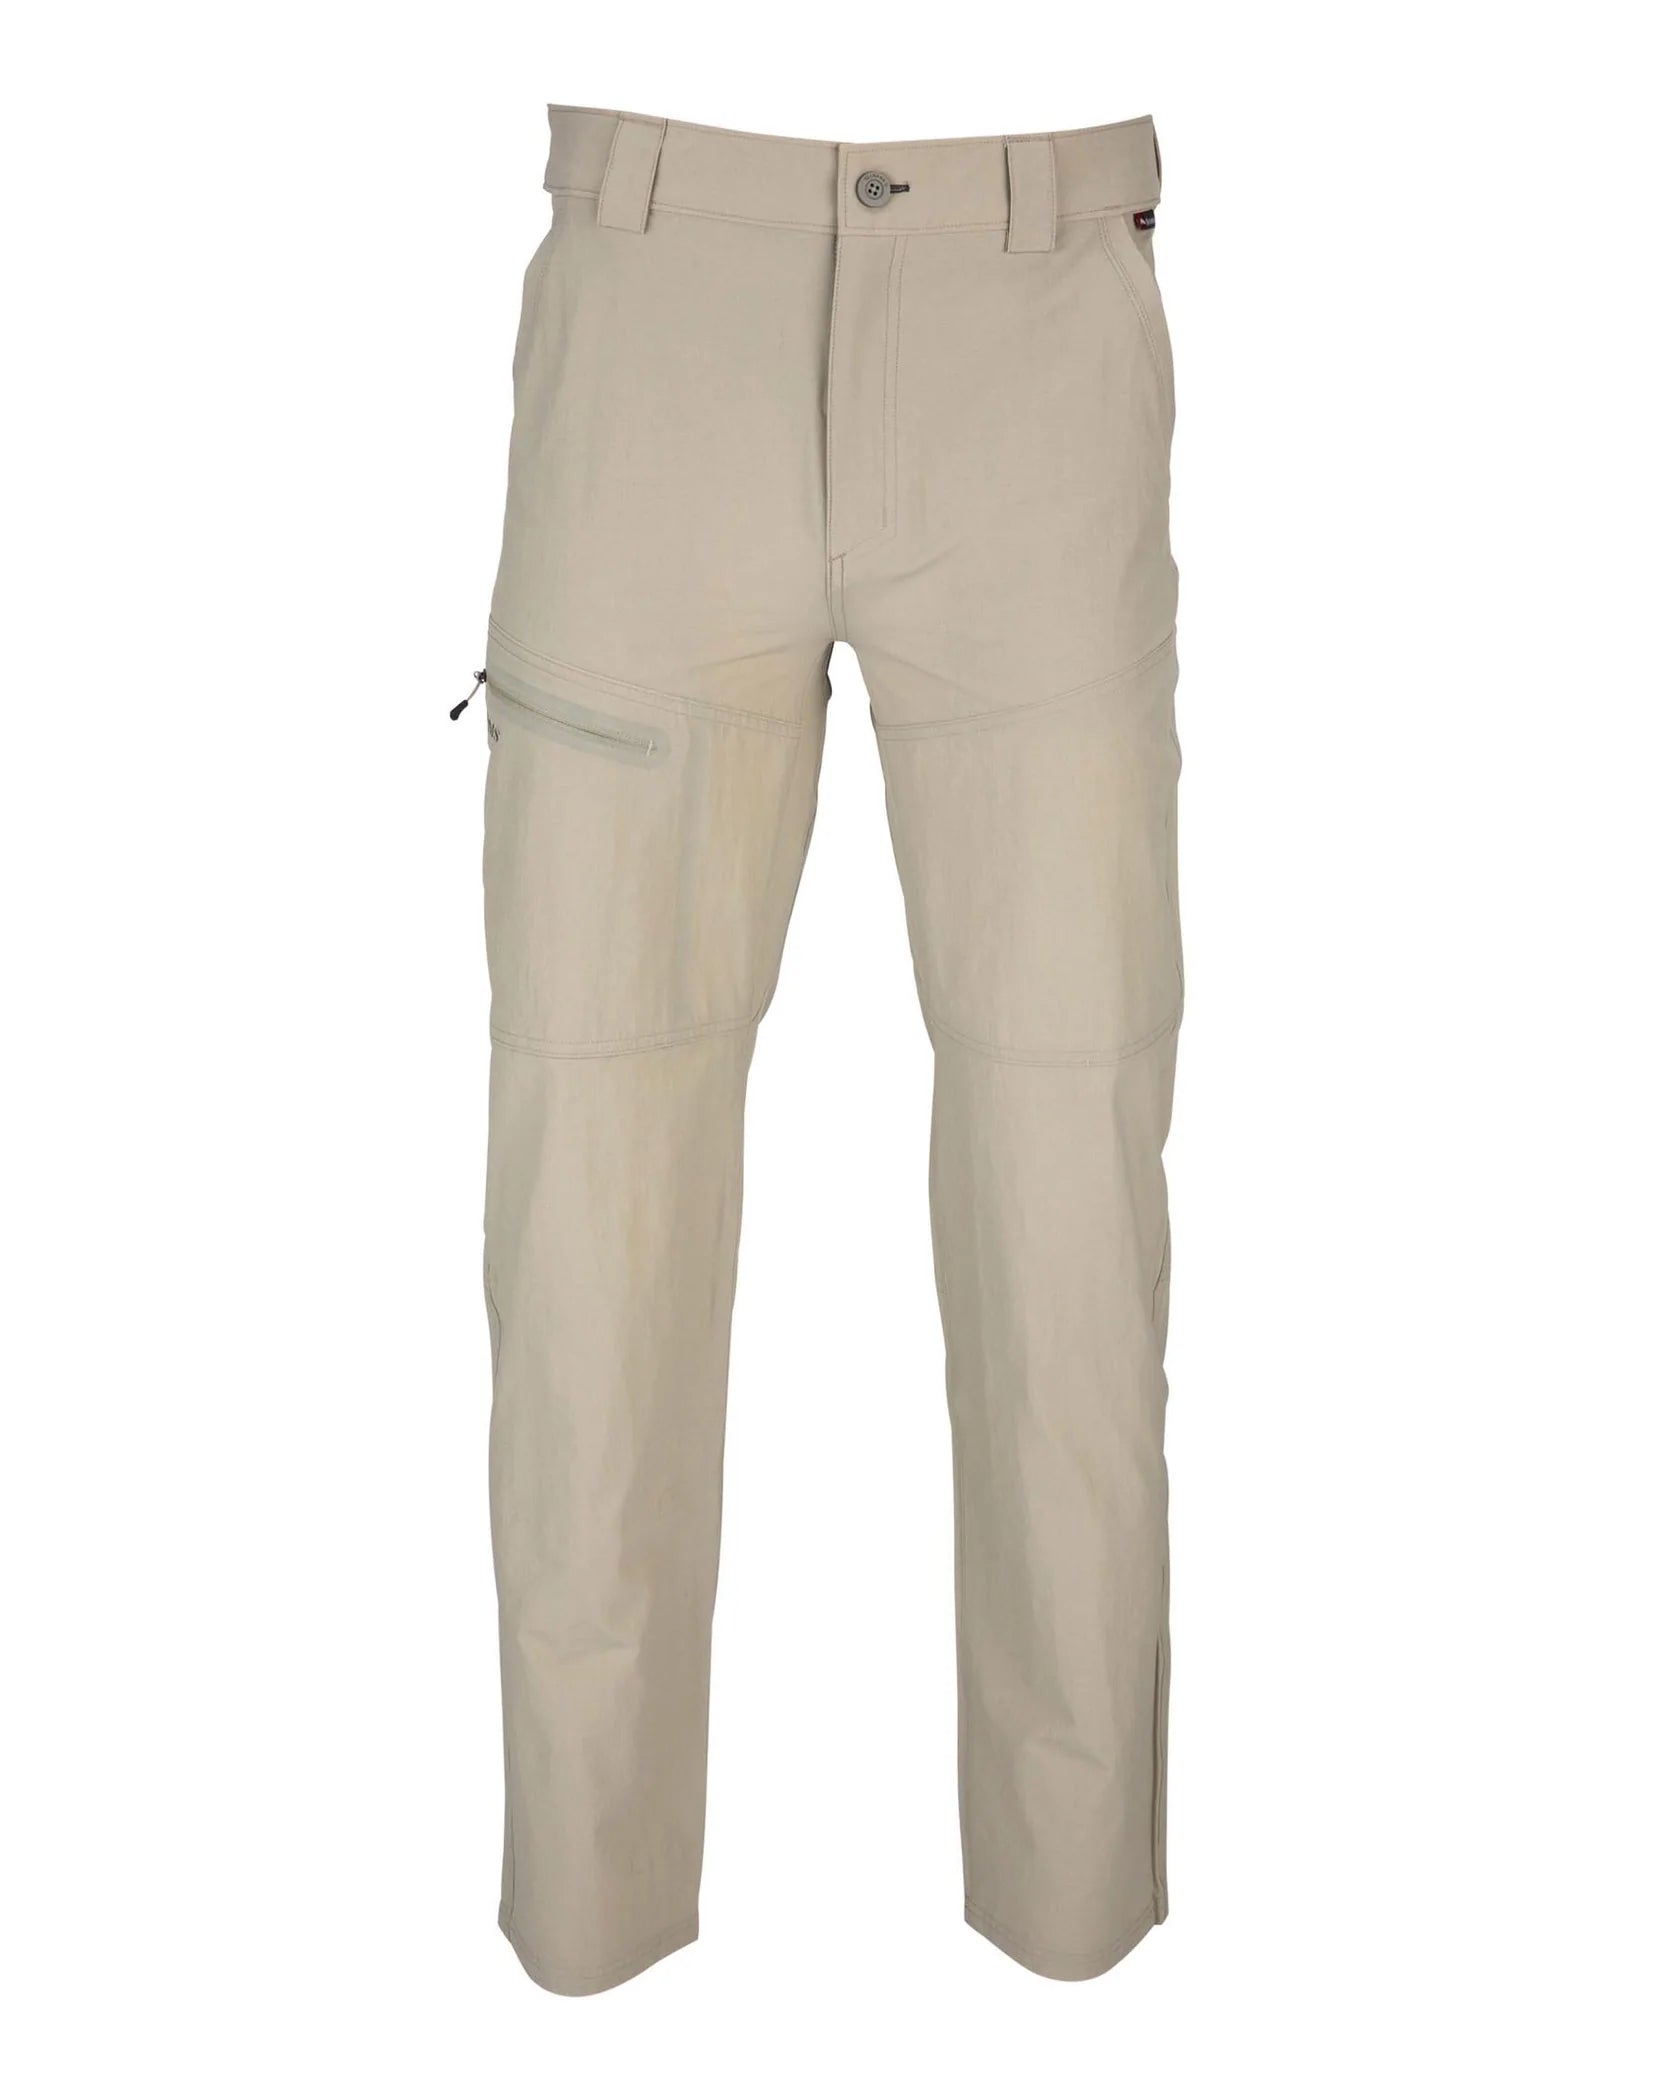 M's Guide Fishing Pants – The Duck Blind